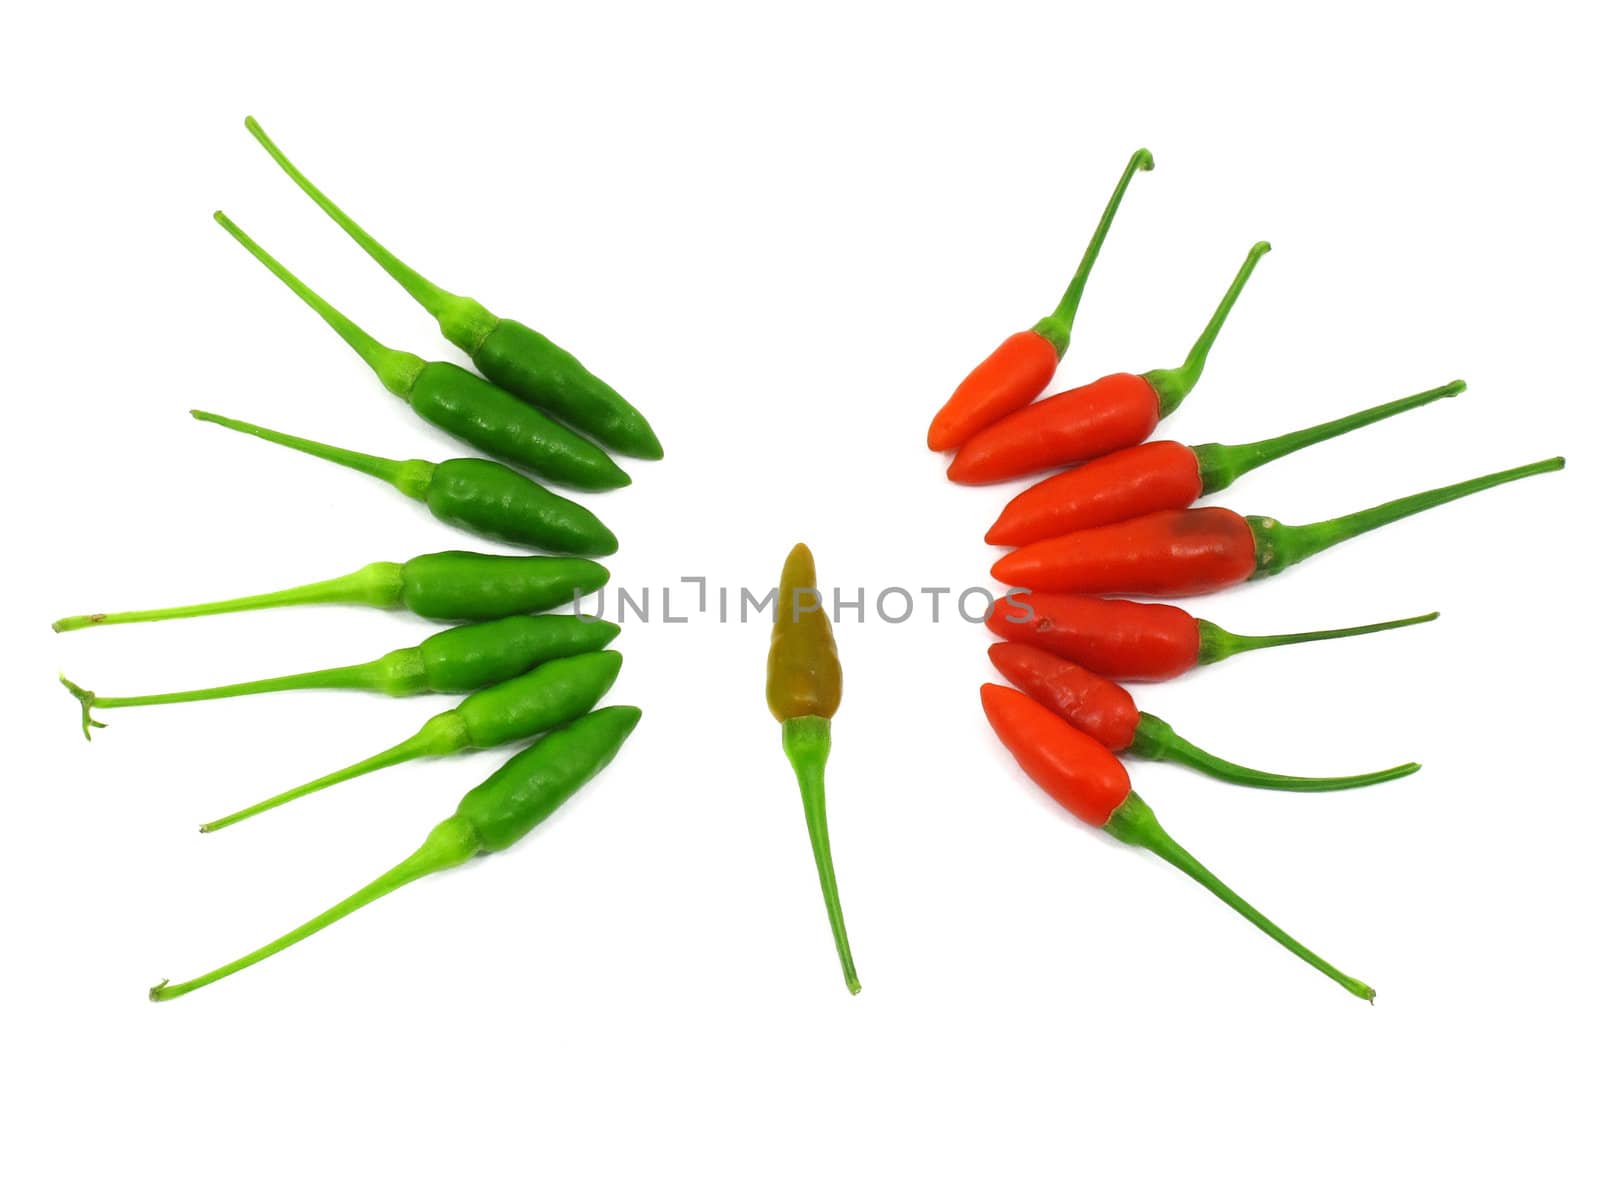 Red and green chilli peppers in two sides with one in the circle